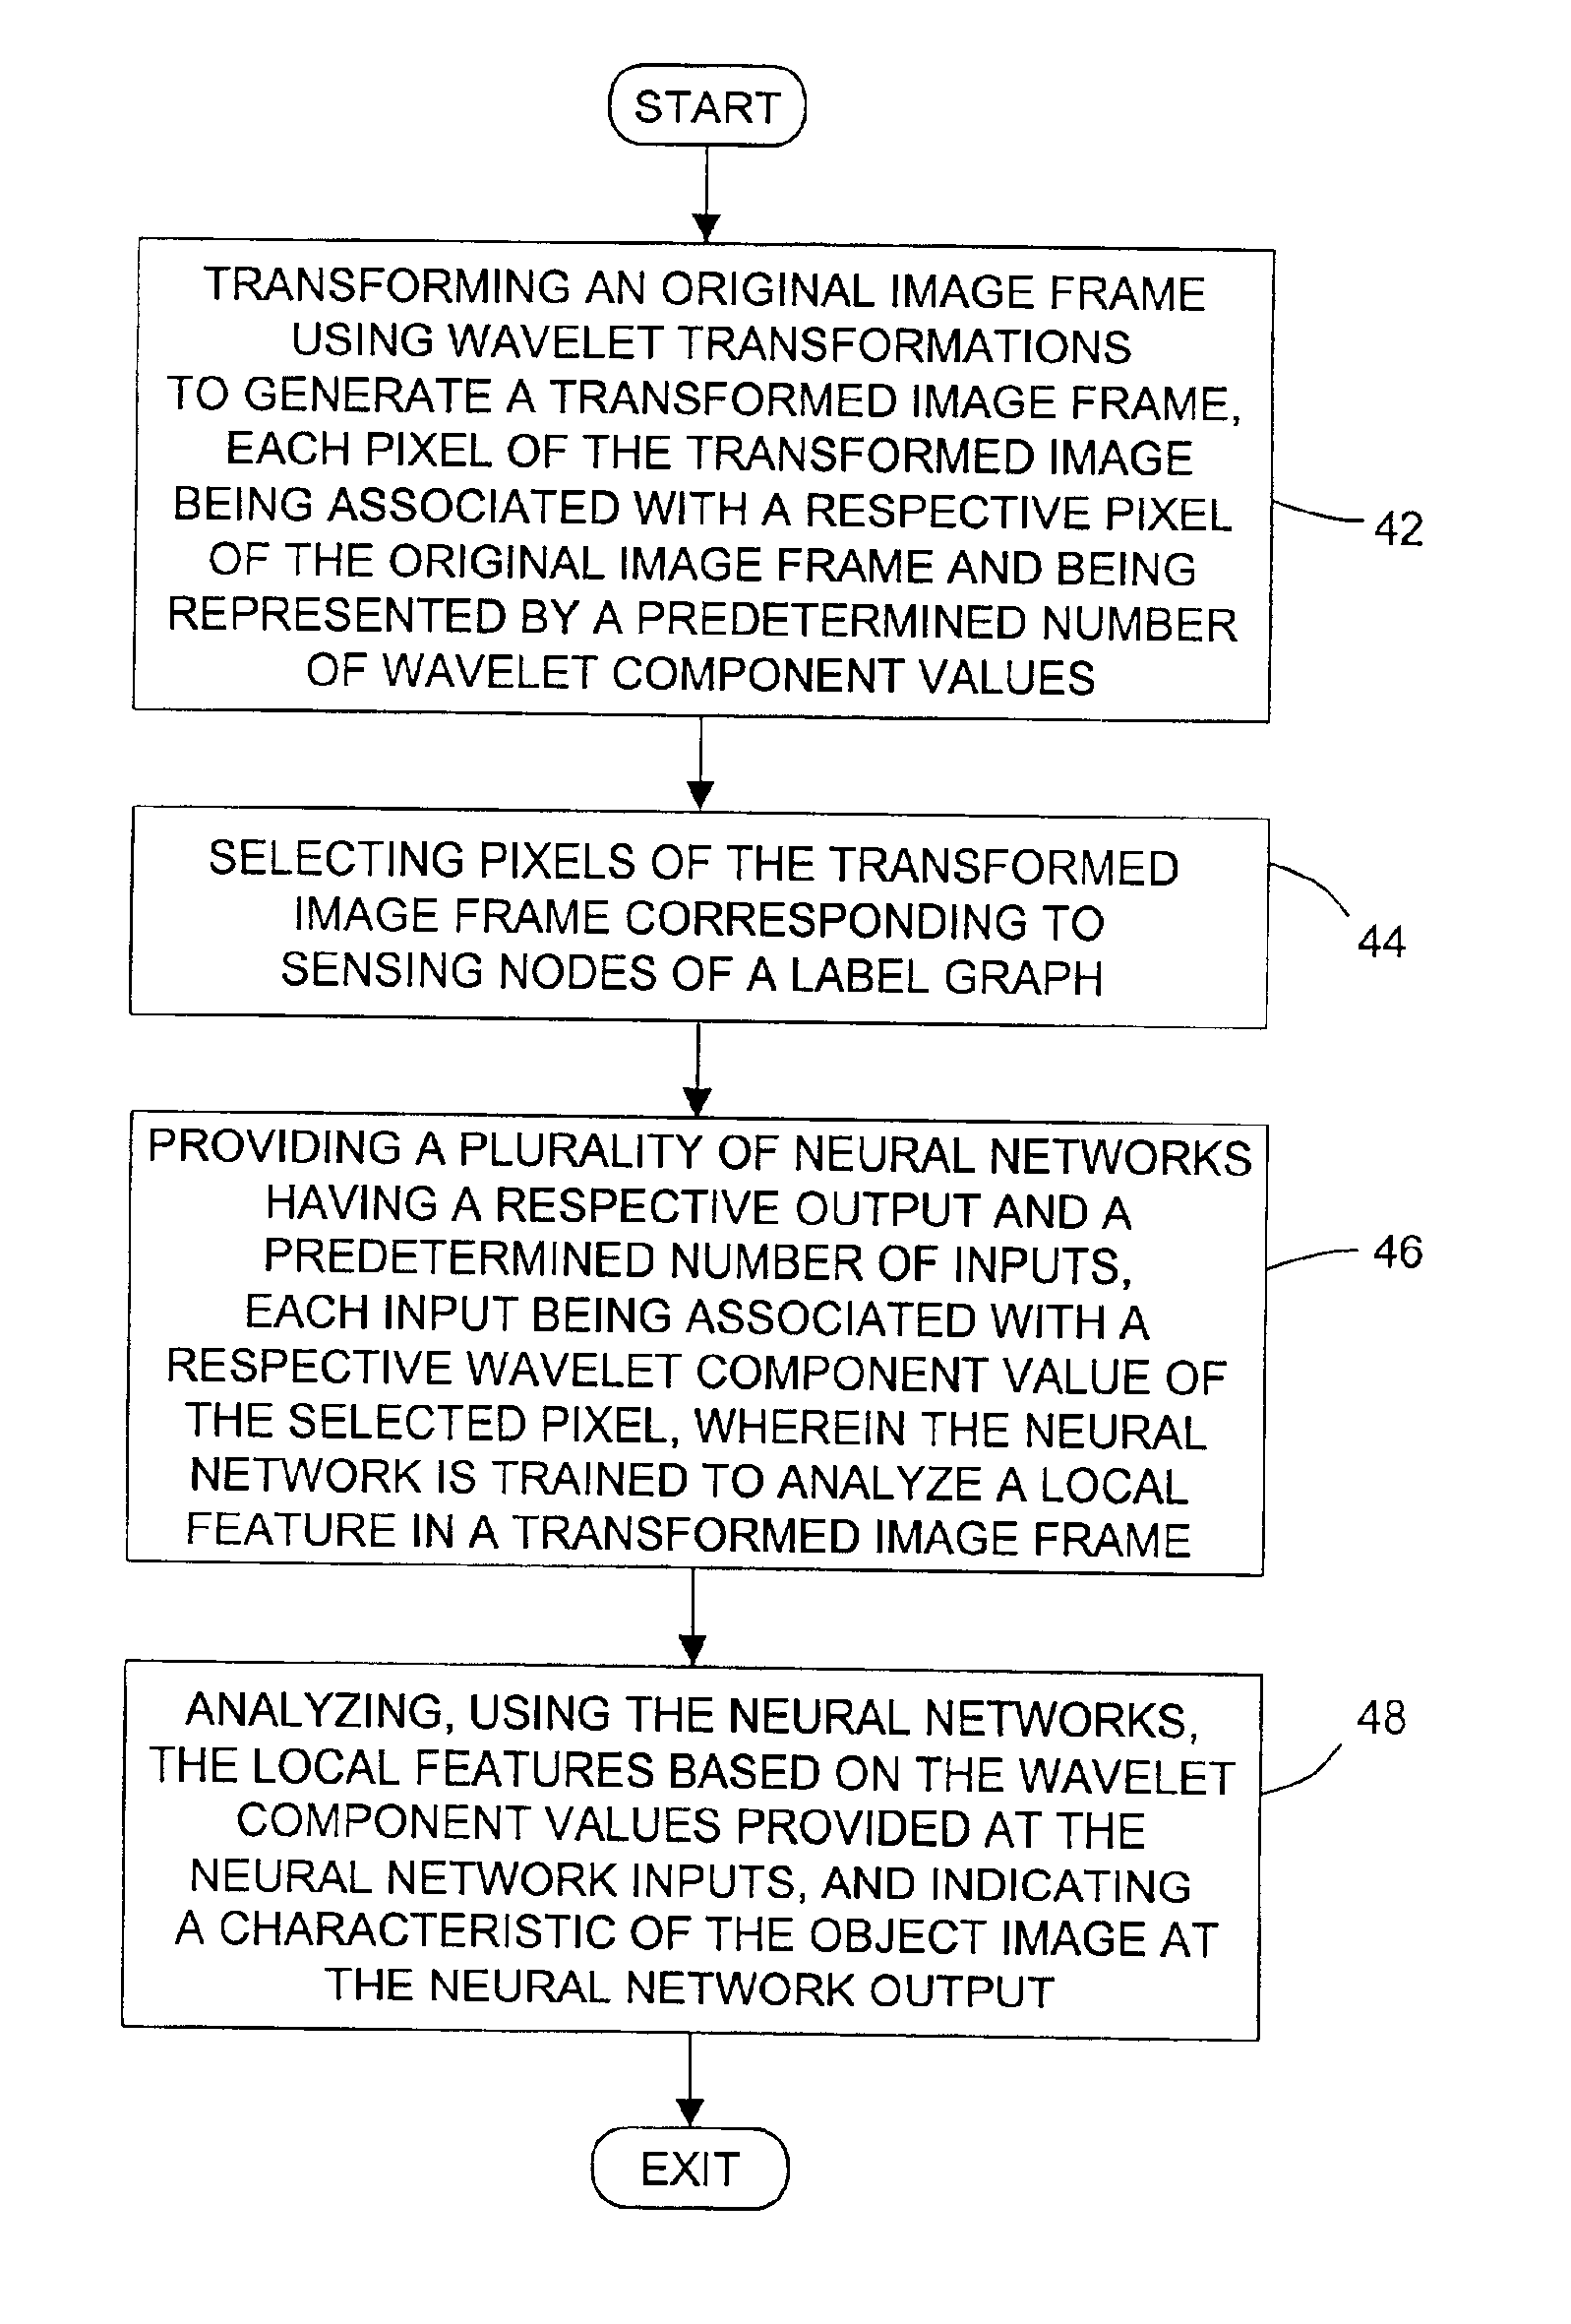 Method and apparatus for image analysis of a gabor-wavelet transformed image using a neural network